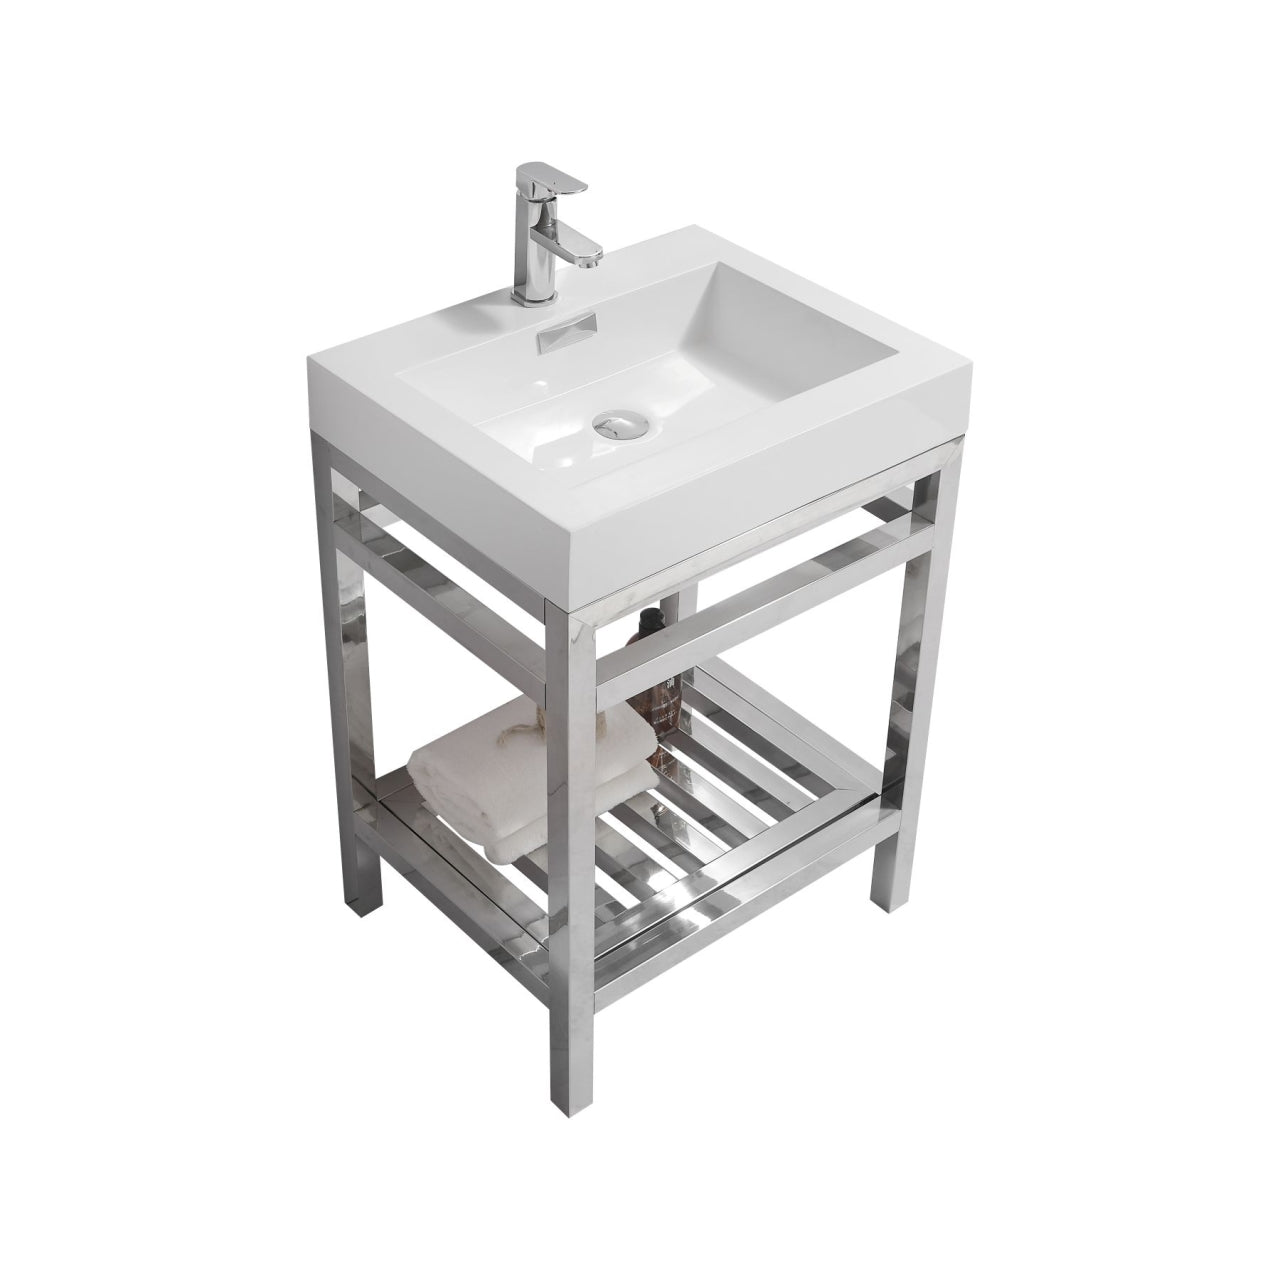 KUBEBATH Cisco AC24 24" Single Bathroom Vanity in Chrome with White Acrylic Composite, Integrated Sink, Angled View